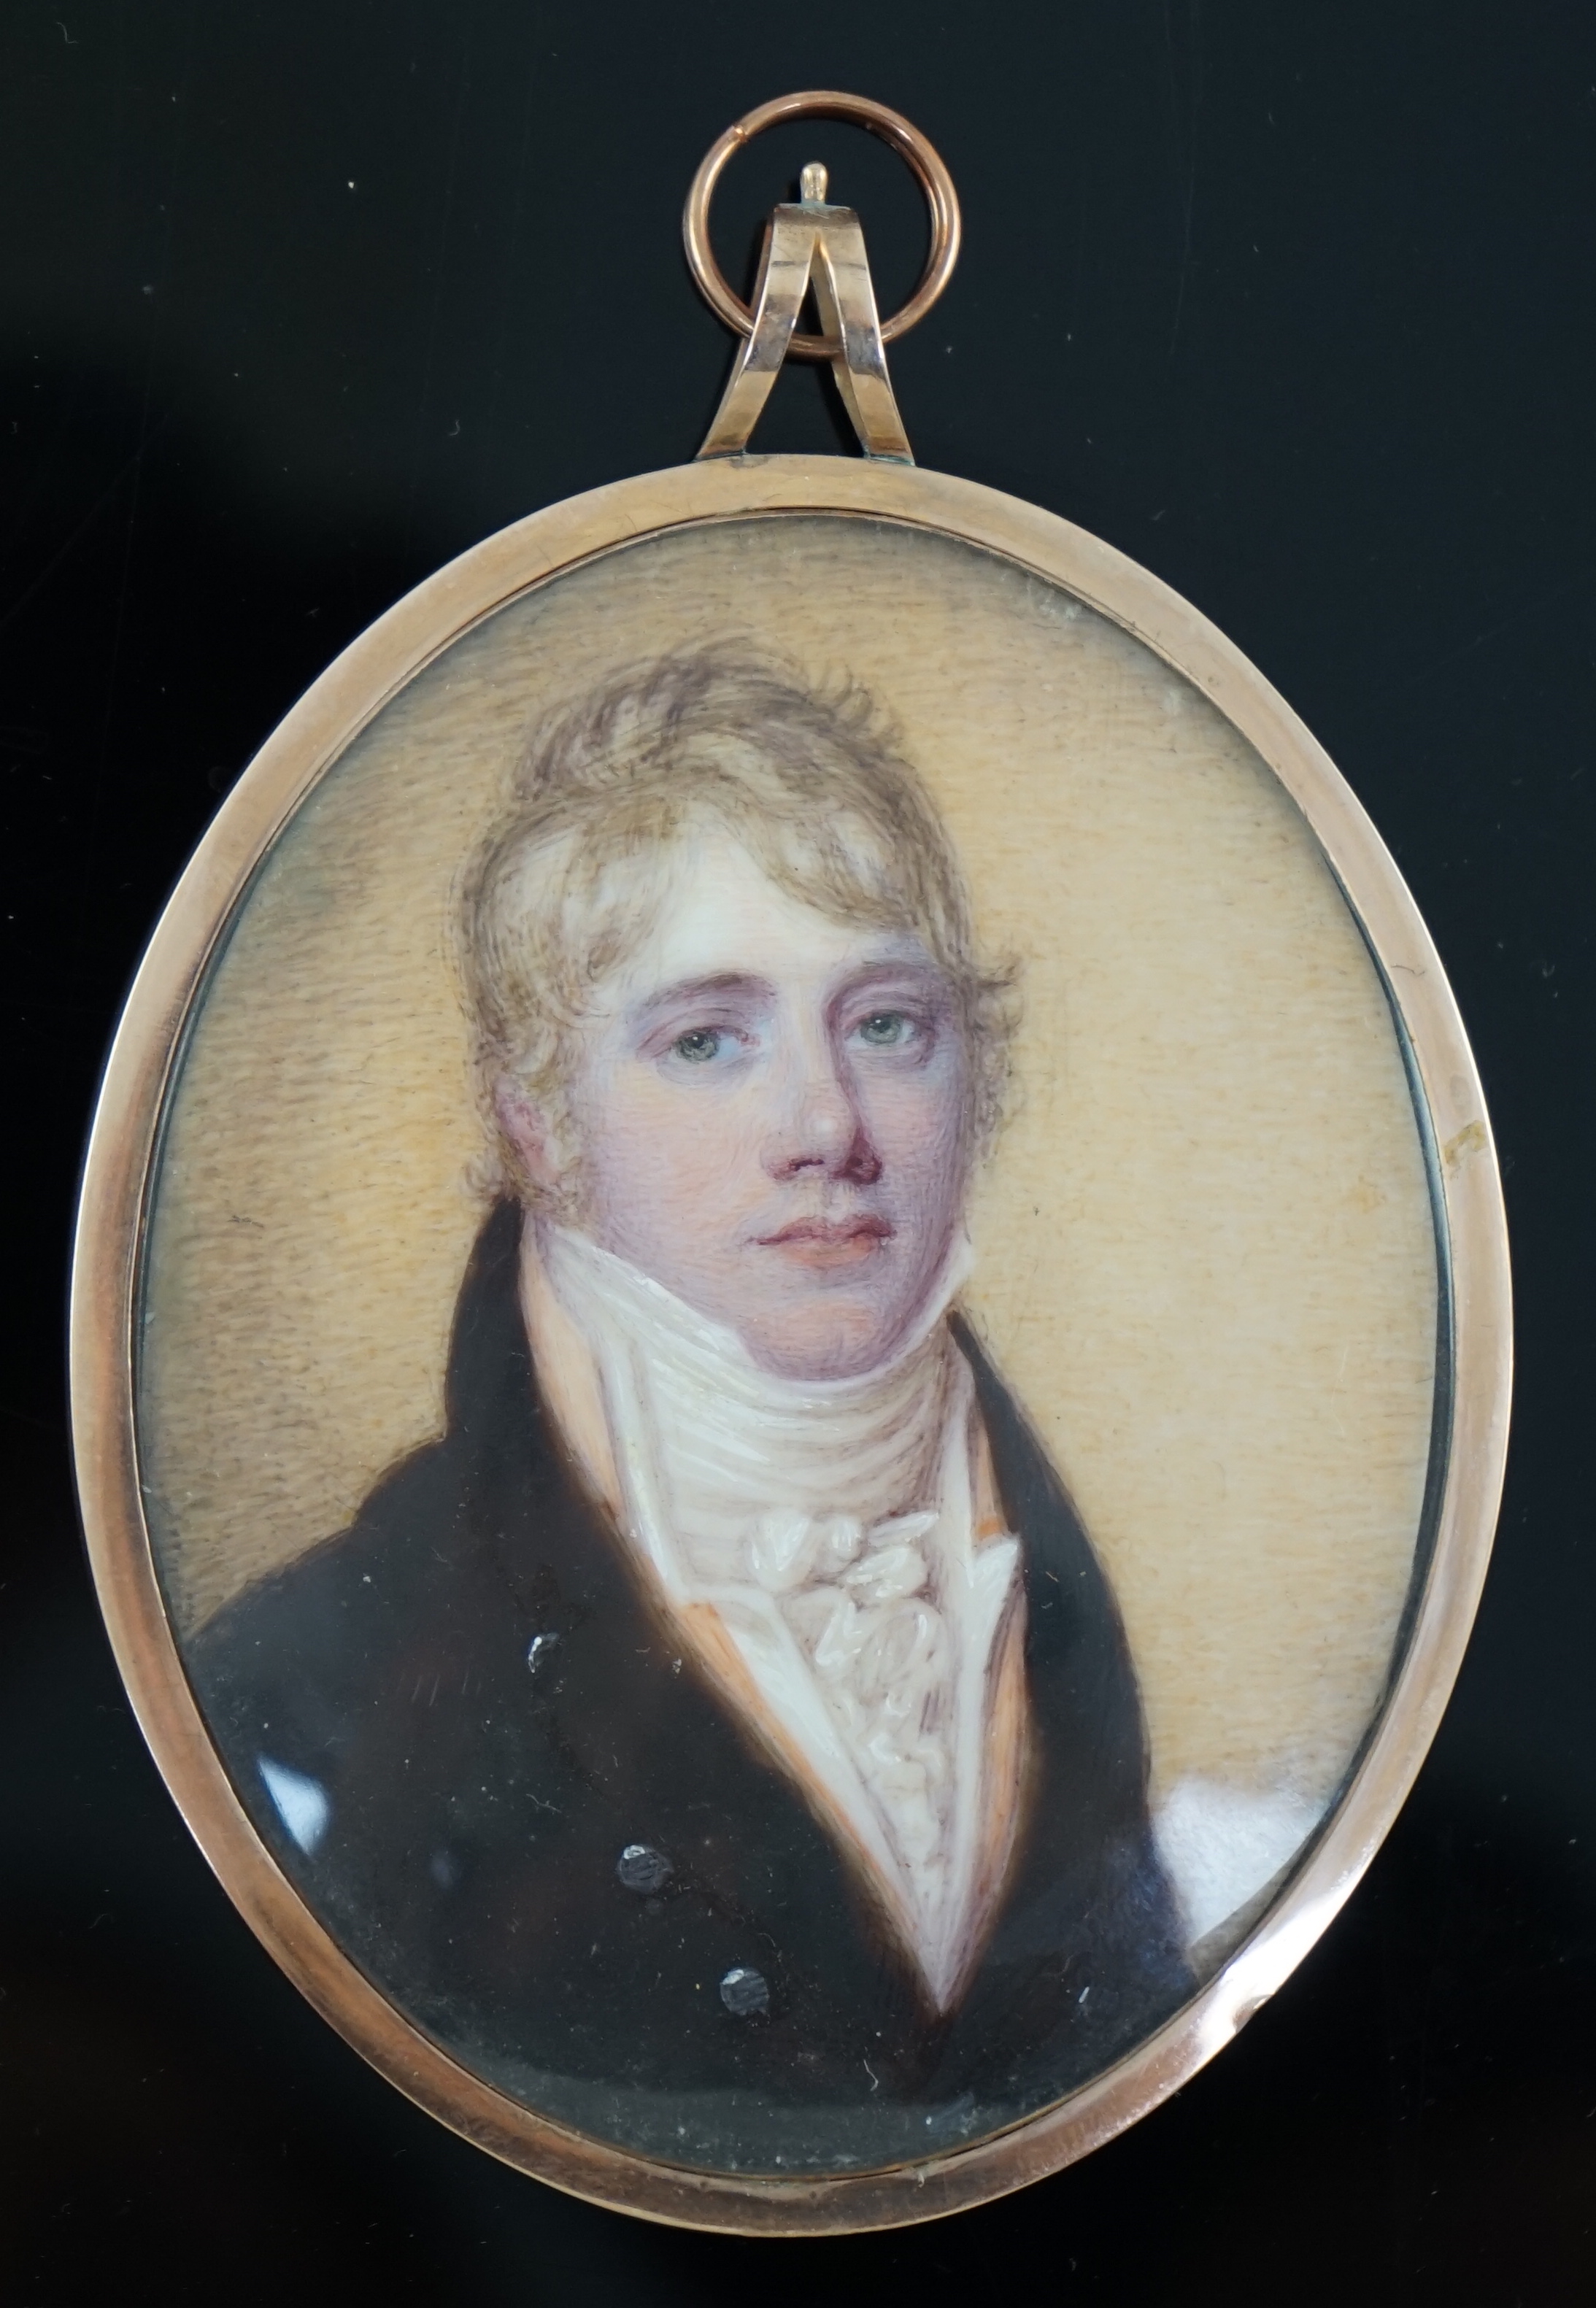 Attributed to John Comerford (c. 1770-1832)? , Portrait miniature of a young man, watercolour on ivory, 7.3 x 5.5cm. CITES Submission reference 433QZK6J